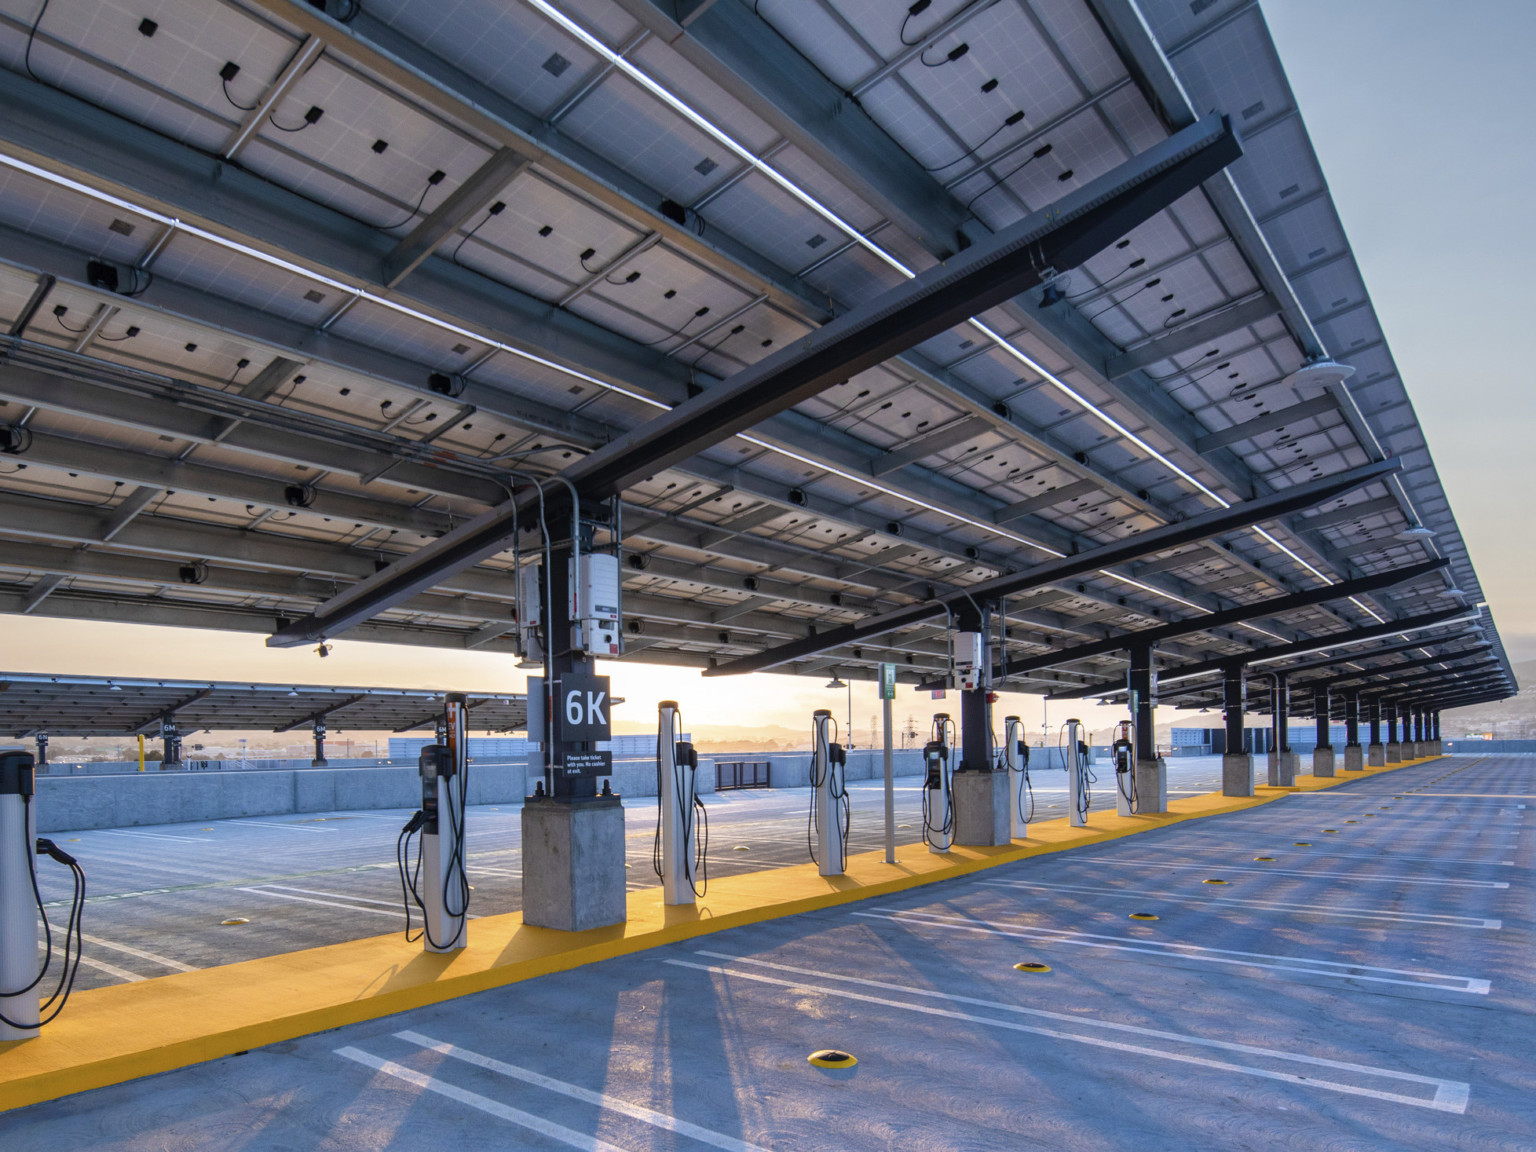 Electric vehicle charging stations under solar canopy supported by black beams on roof of garage